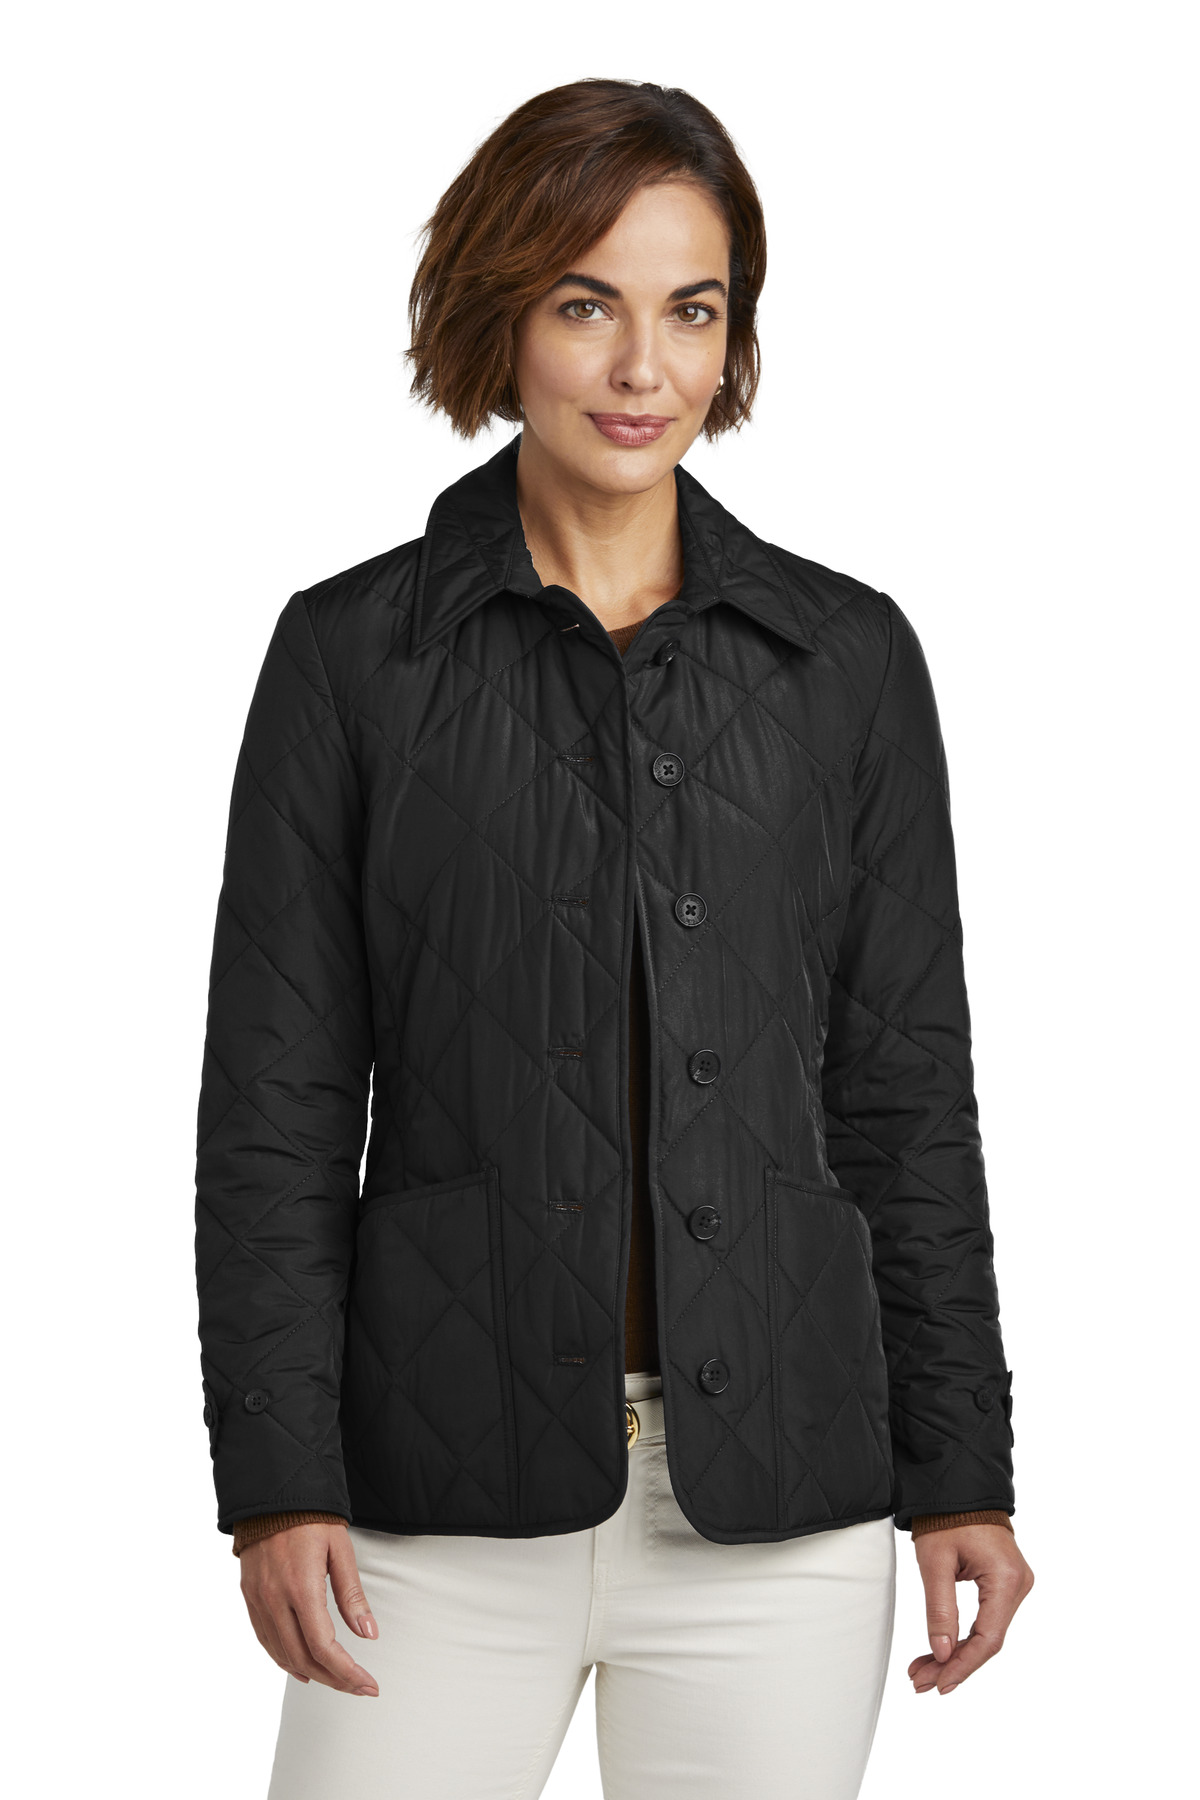 Brooks Brothers Women s Quilted Jacket BB18601